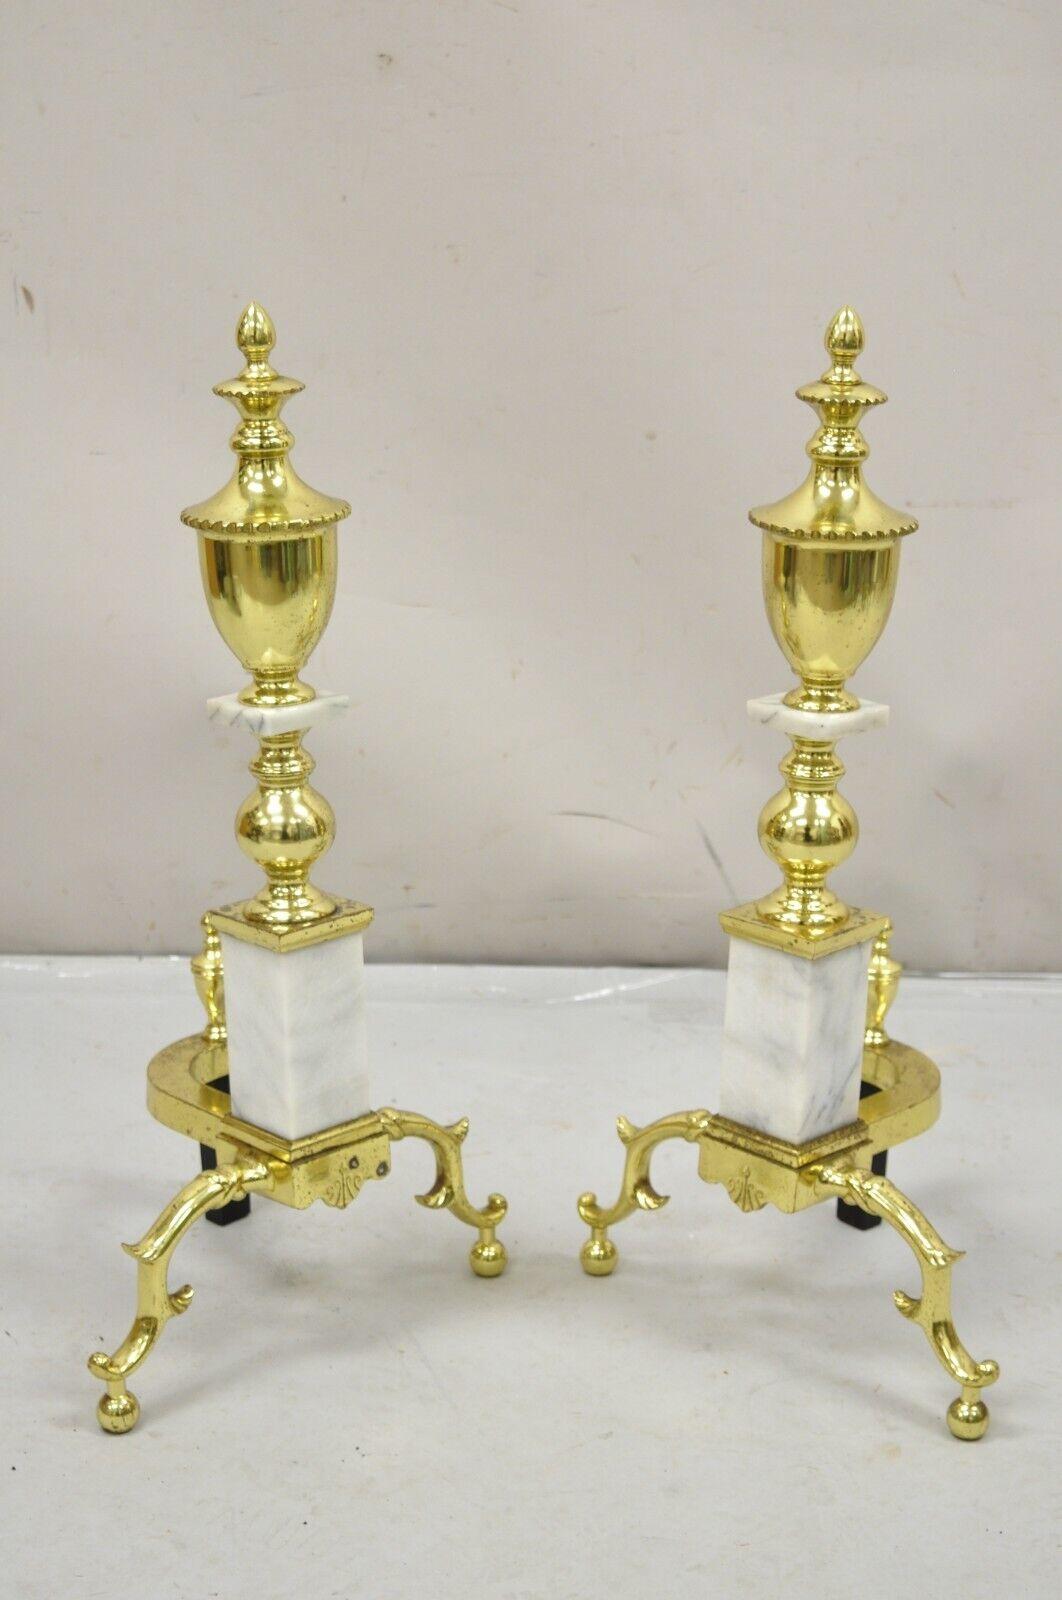 Vintage Brass Urn & Marble Federal Style Branch Leg Fireplace Andirons - a Pair. Circa Mid to Late 20th Century. Measurements: 25.25